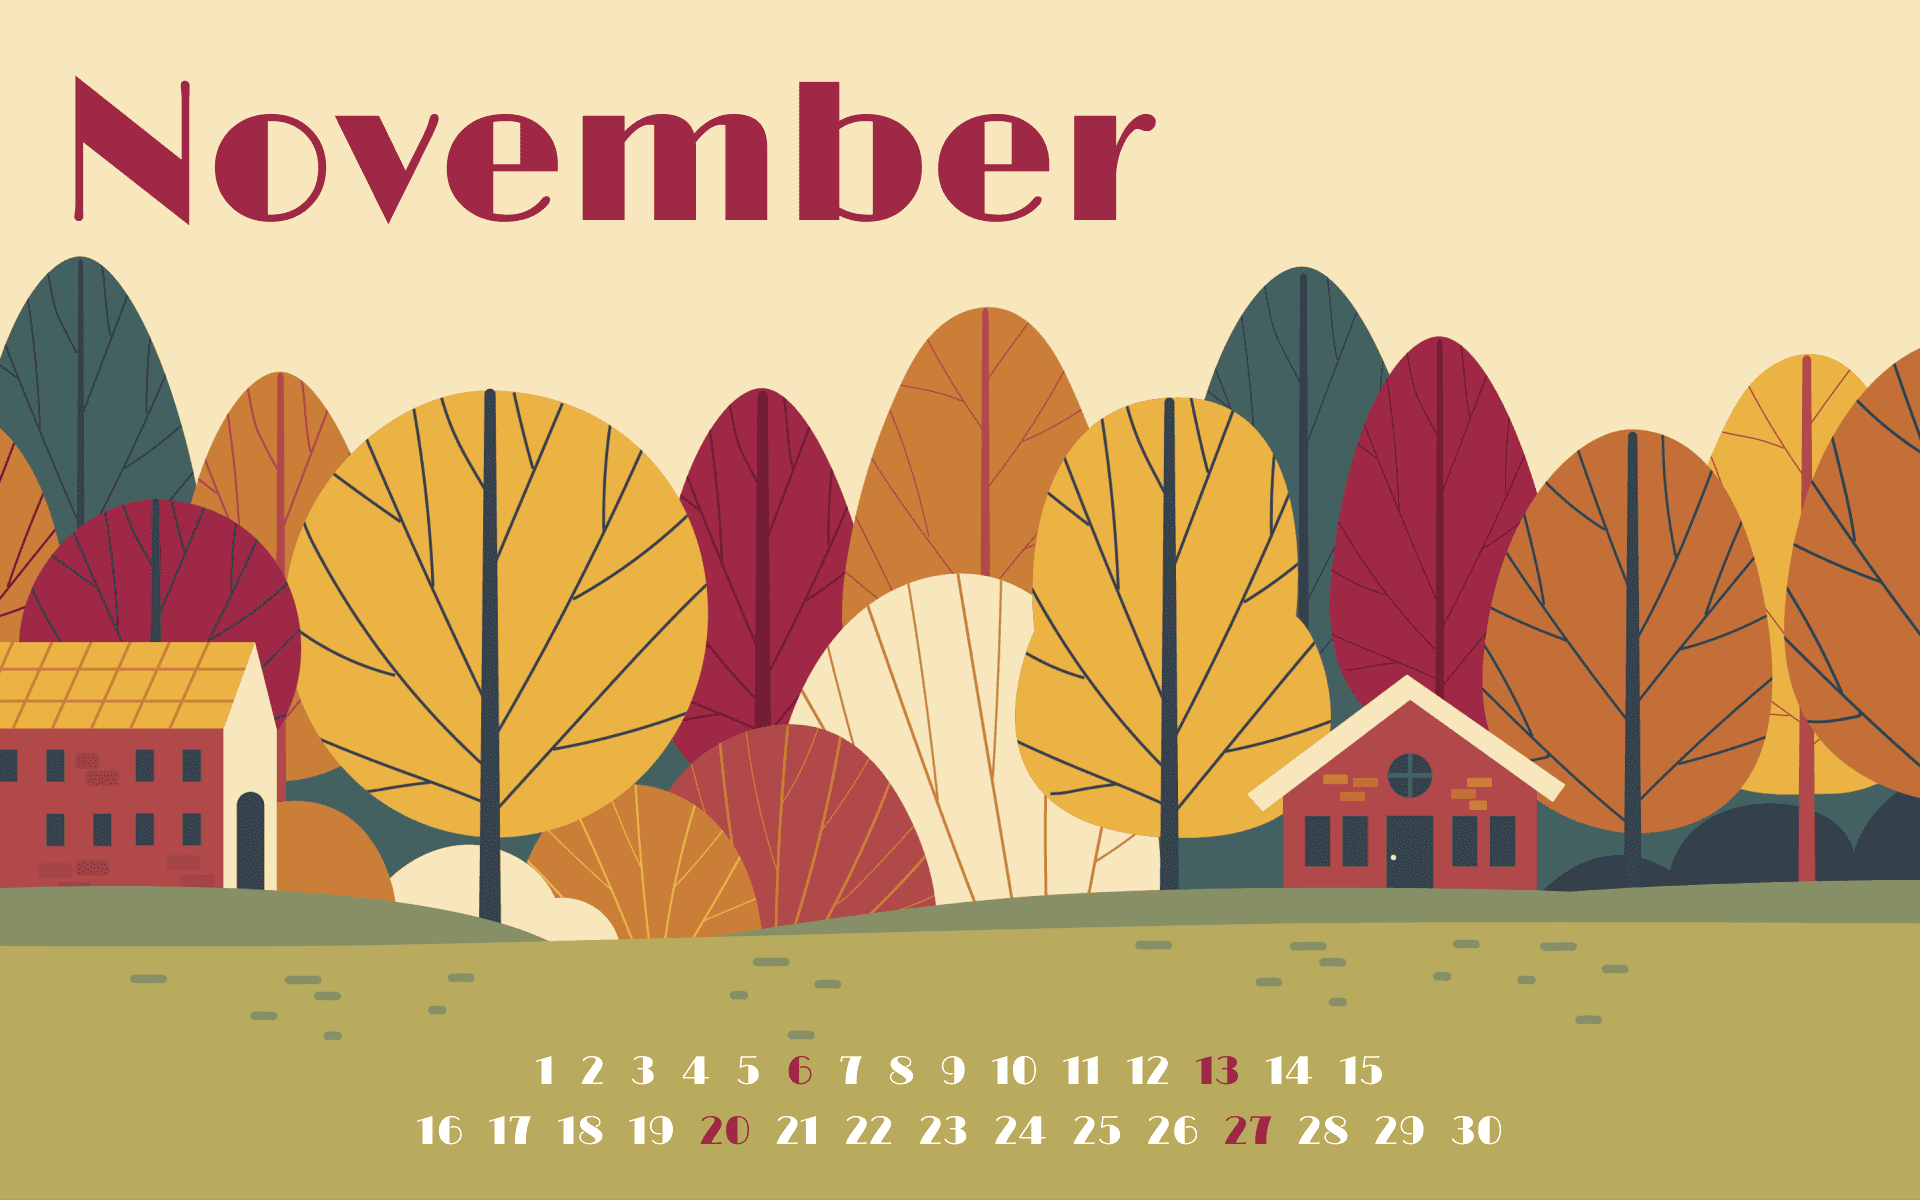 Free calendar for November, picture size 1920x1200.